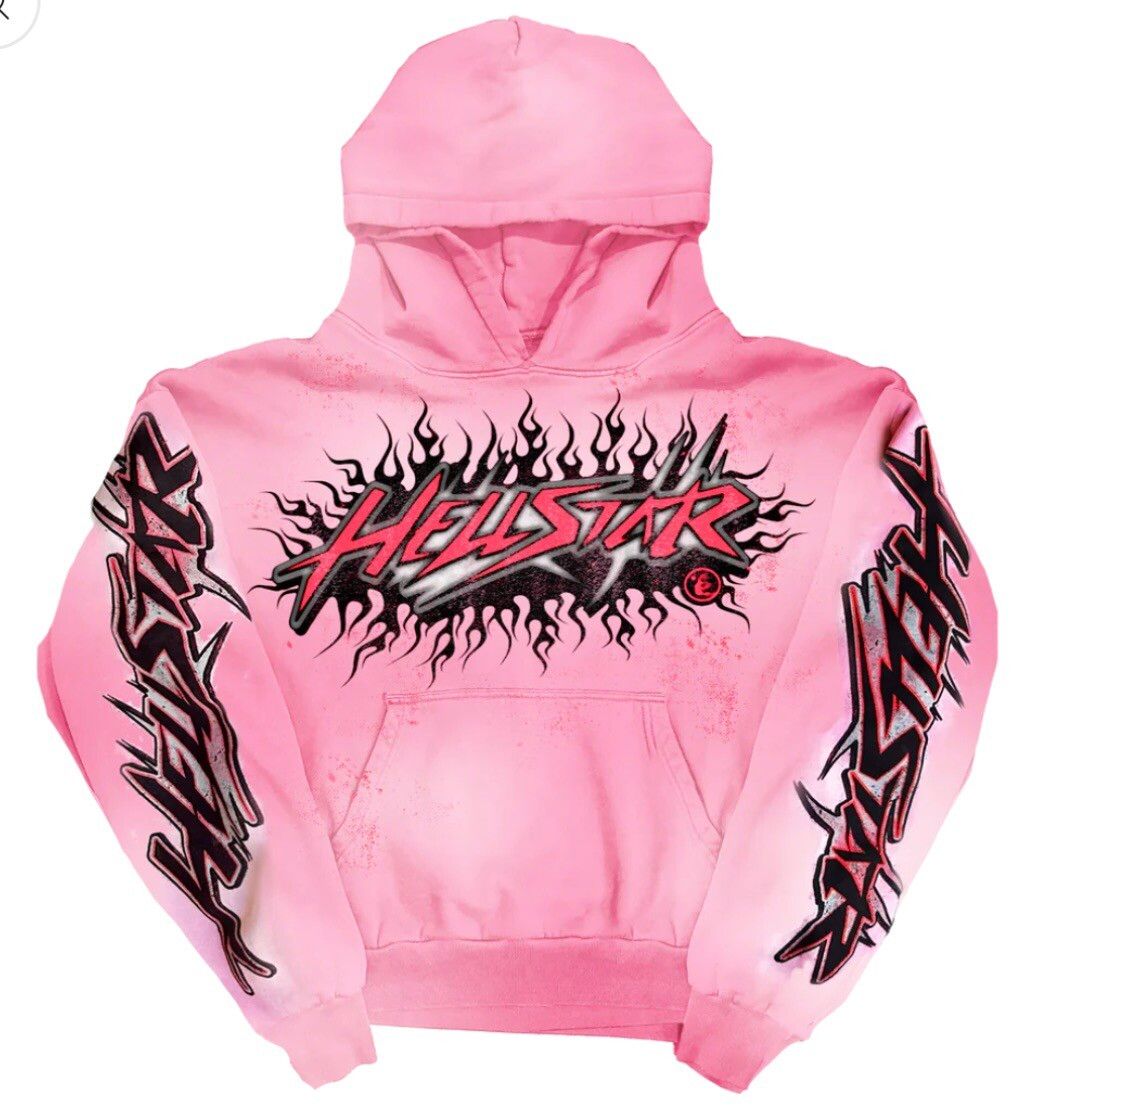 HELLSTAR Brainwashed Hoodie without Brain Size US M / EU 48-50 / 2 - 1 Preview